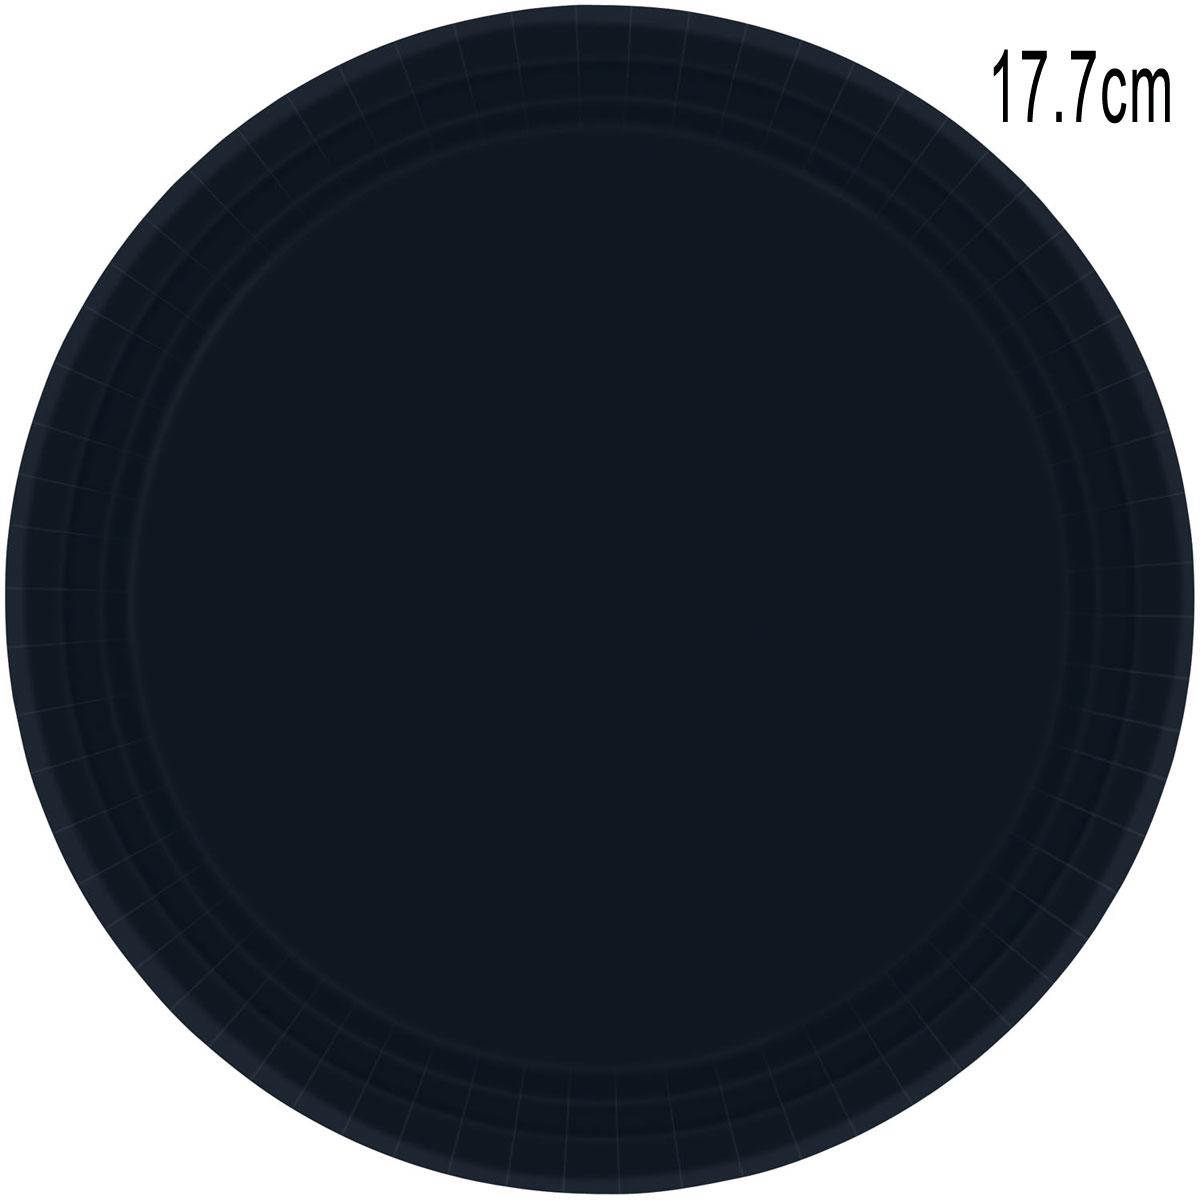 Pack 8 Jet Black Paper Dessert Plates 17.7cm by Amscan 54015-10 available here at Karnival Costumes online party shop